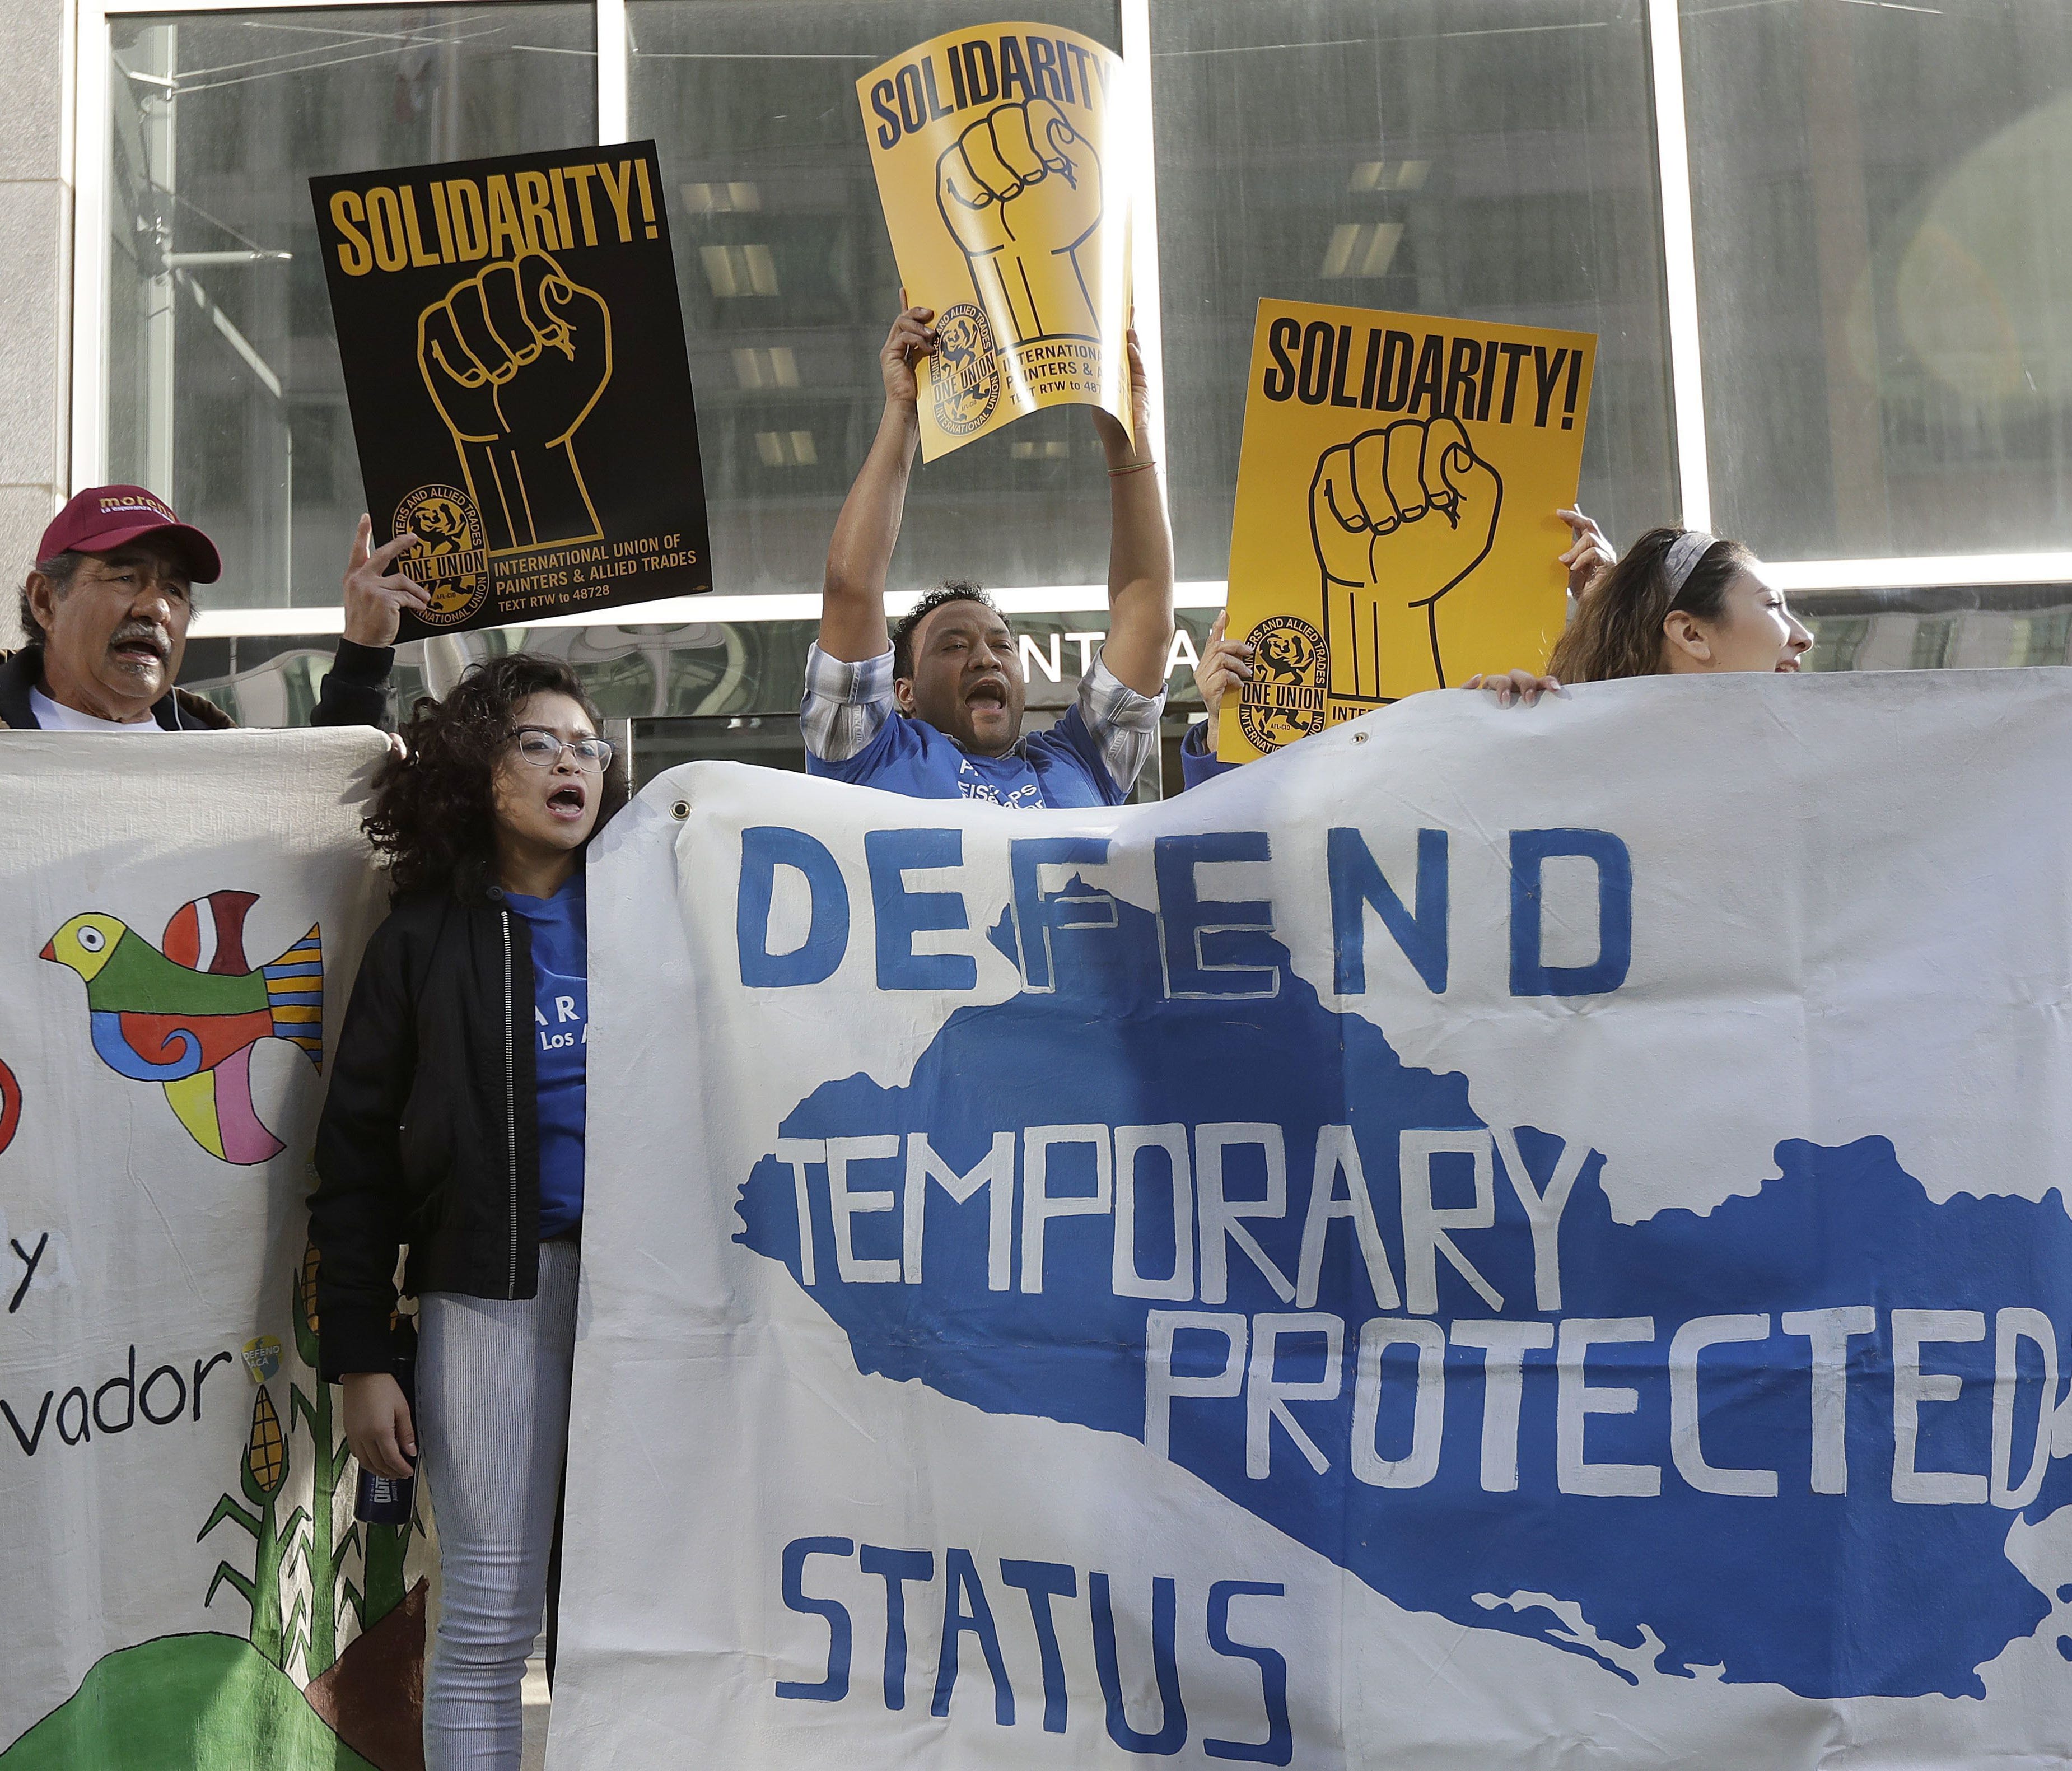 Supporters of Temporary Protected Status immigrants chant at a rally in San Francisco on March 12, 2018, before a news conference announcing a lawsuit against the Trump administration over its decision to end the program that lets immigrants live and